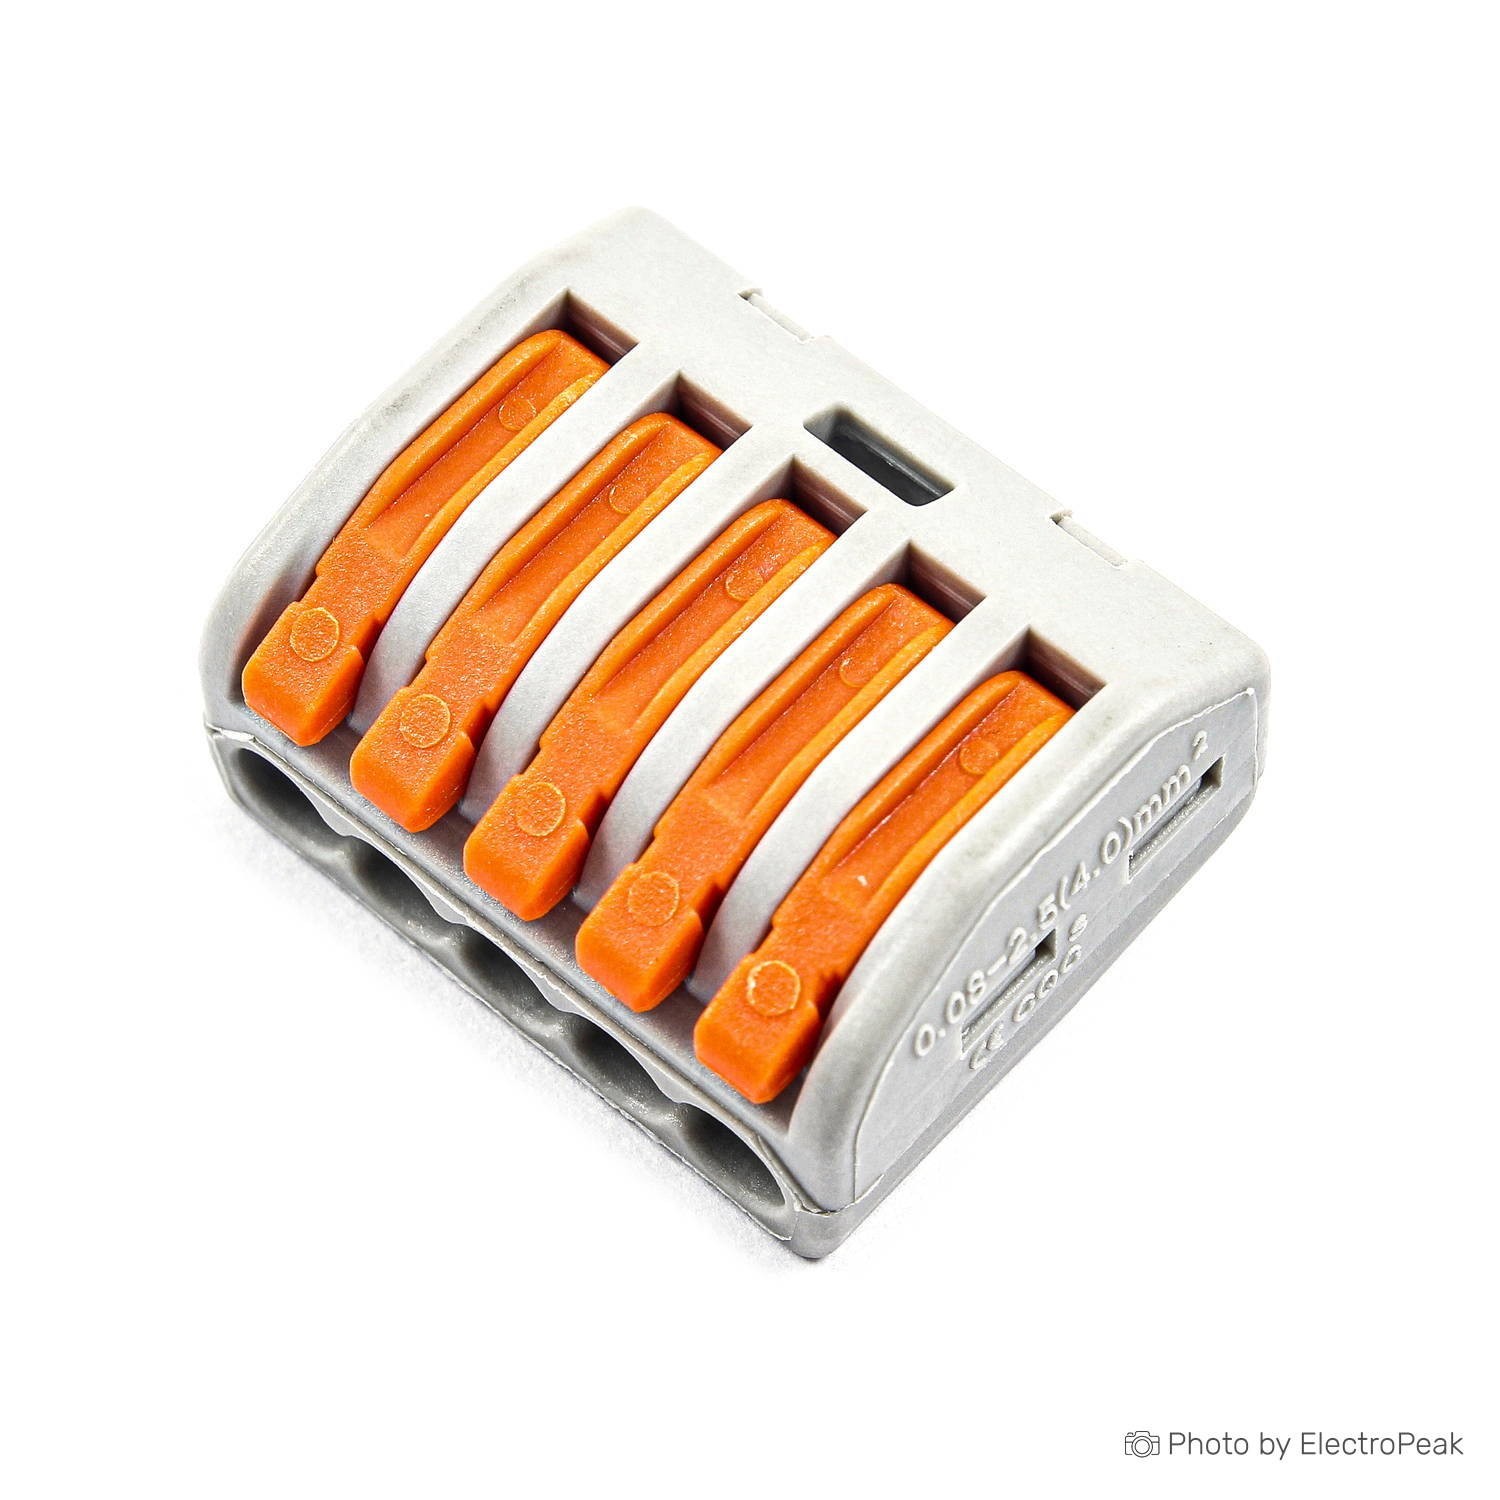 Universal Terminals Block Plug-in Electrical Wire Connector PCT-212-213-215  Type Wiring Cable Connector